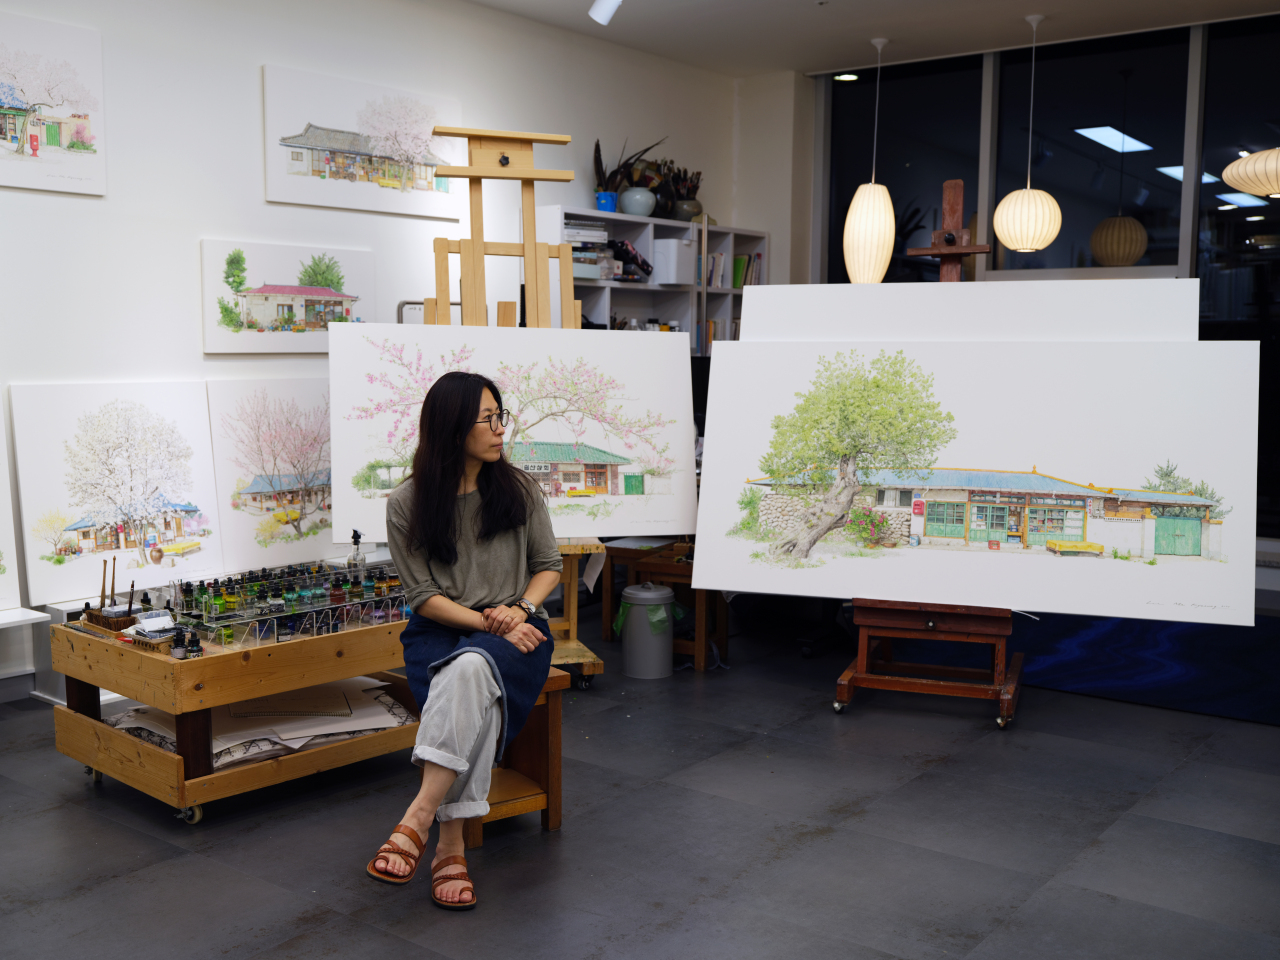 Lee Me-kyeoung sits in front of her painting in her studio in Hanam city, Gyeonggi Province. (Lee Me-kyeoung)